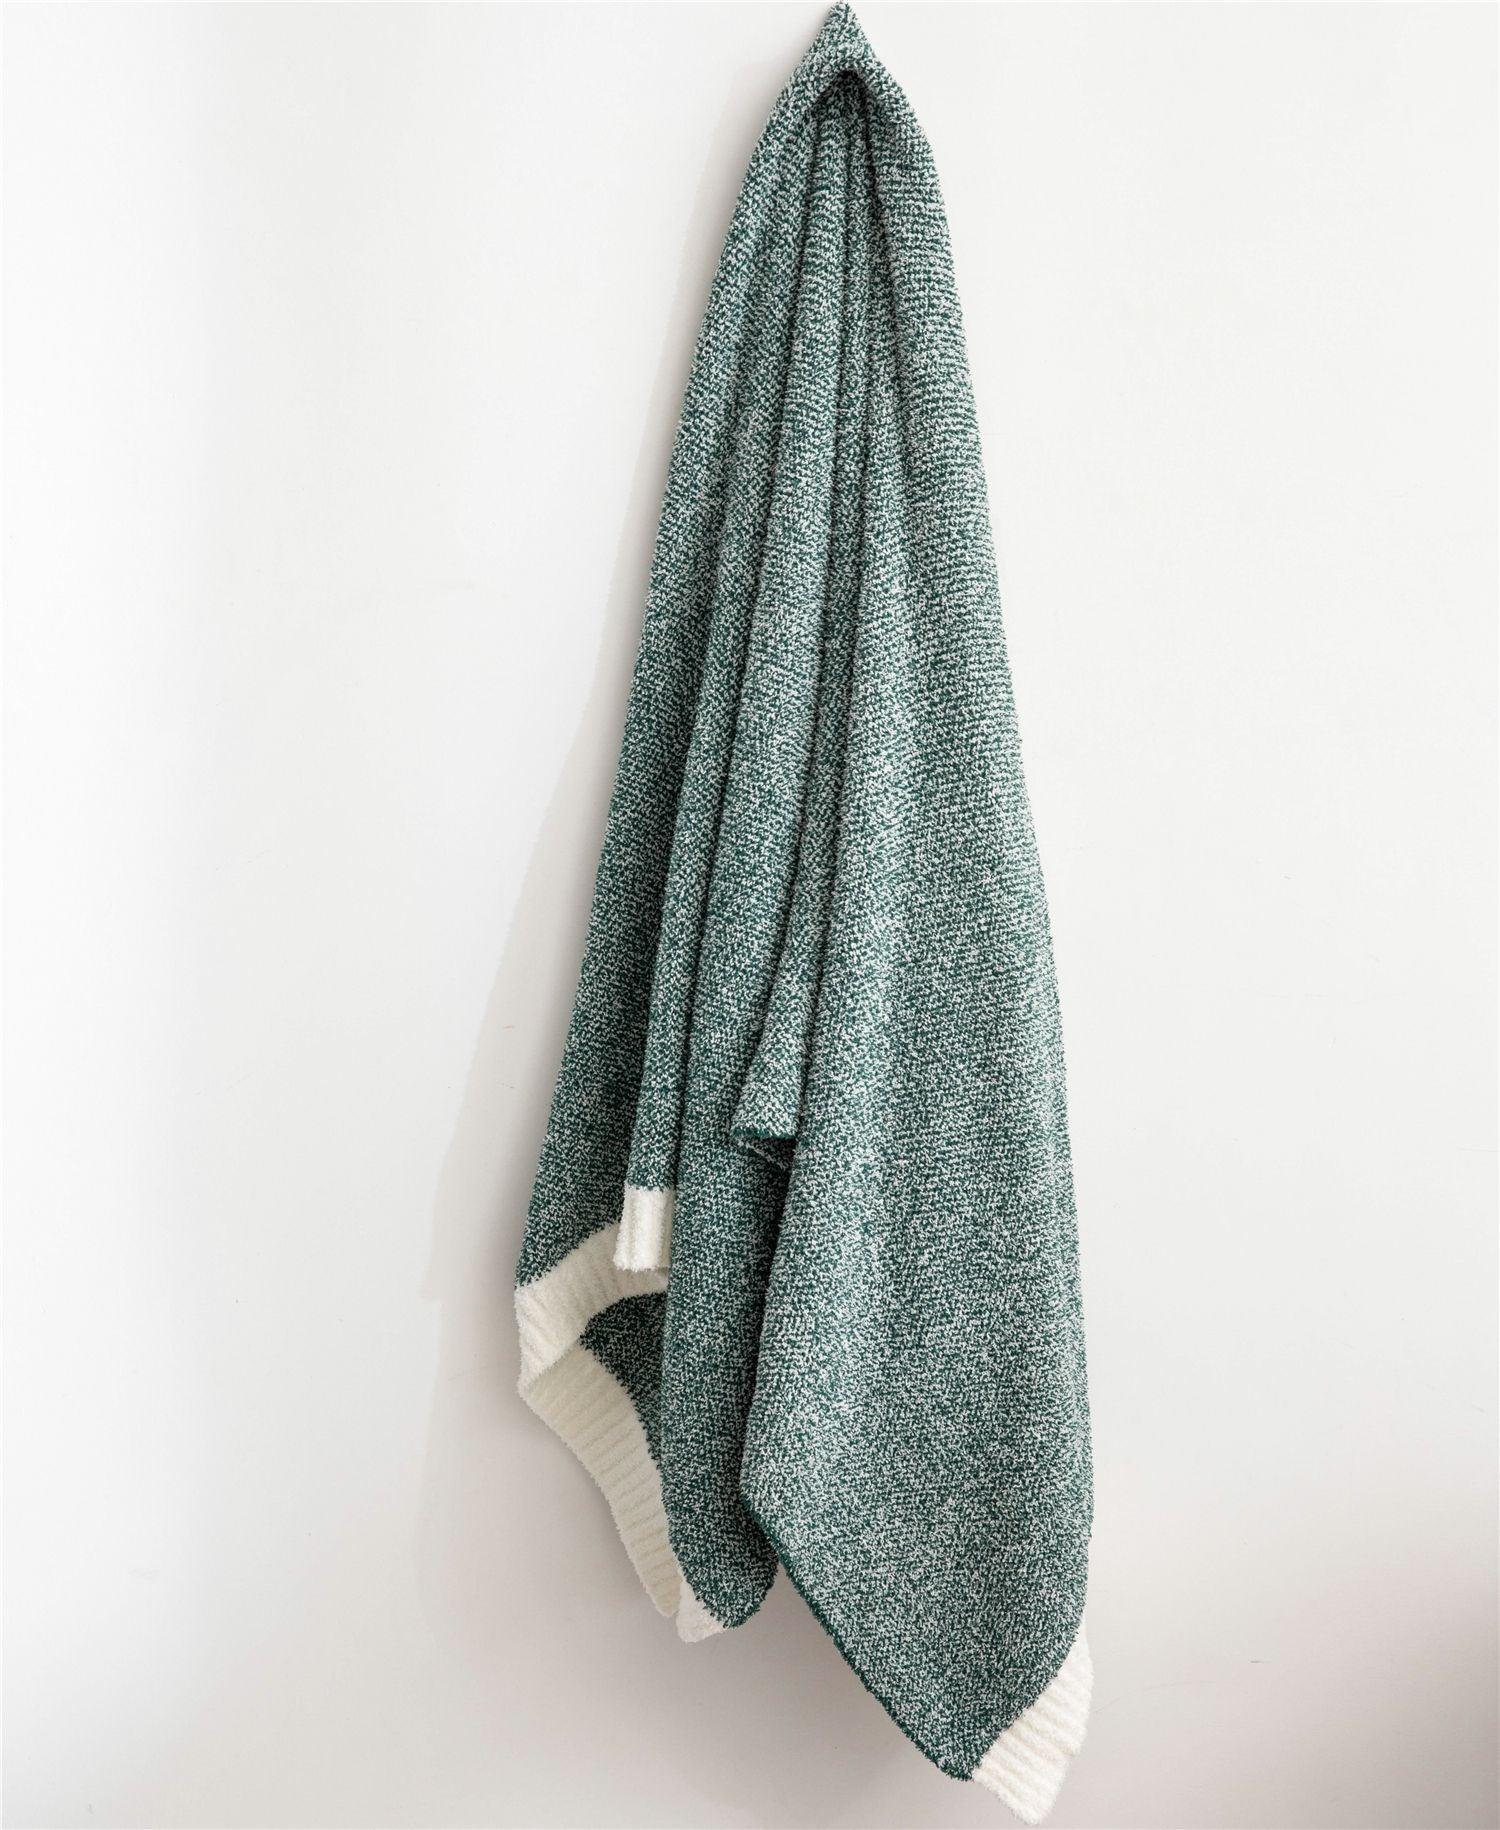 New Home Soft Knit Blanket  